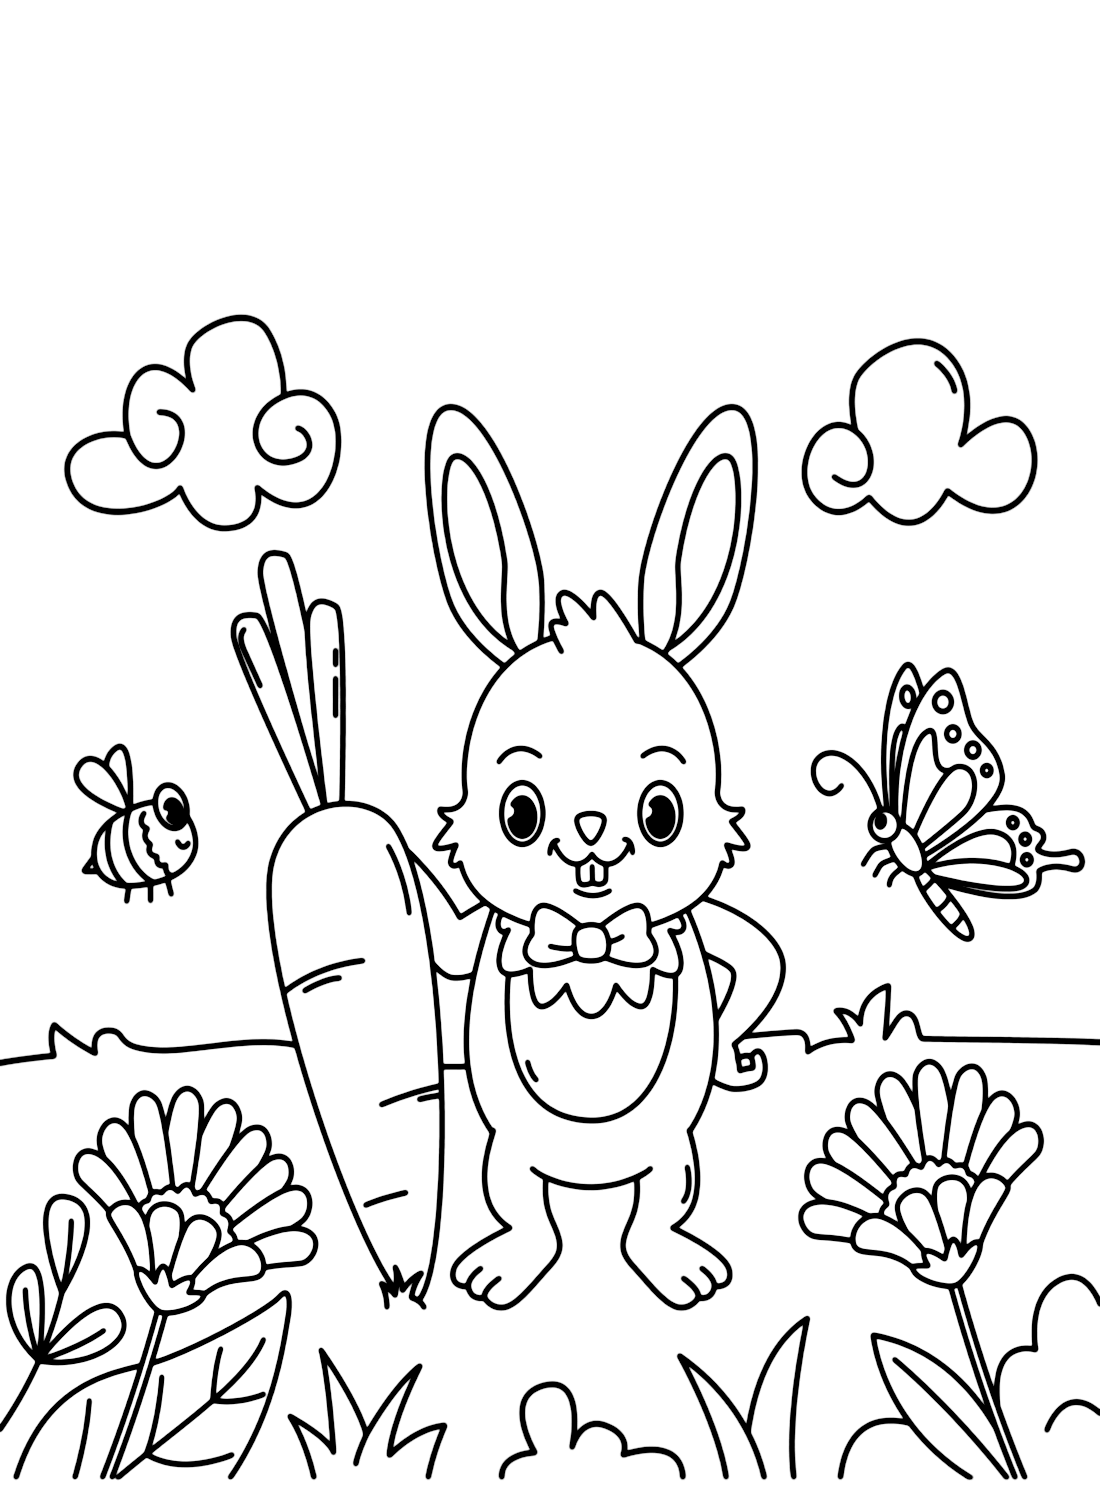 Coloring Page Carrot and Bunny